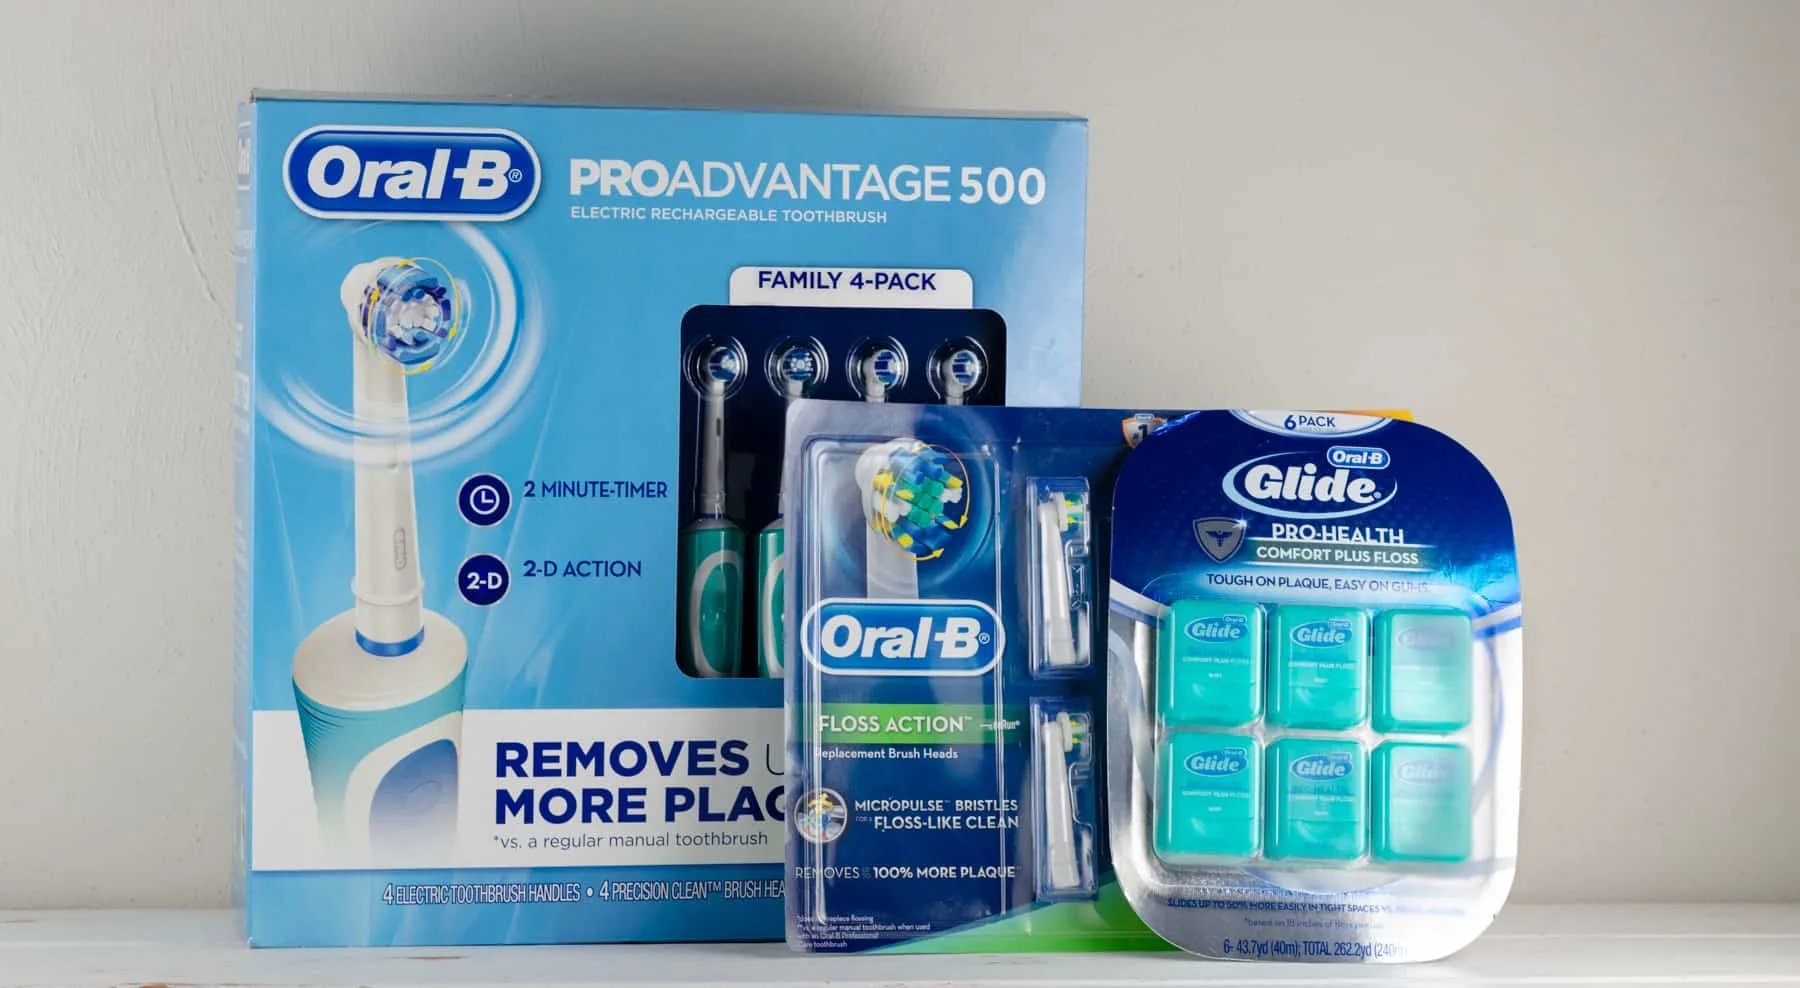 5+ Tips For Beautiful Healthy Smiles picture of oral-b products to help